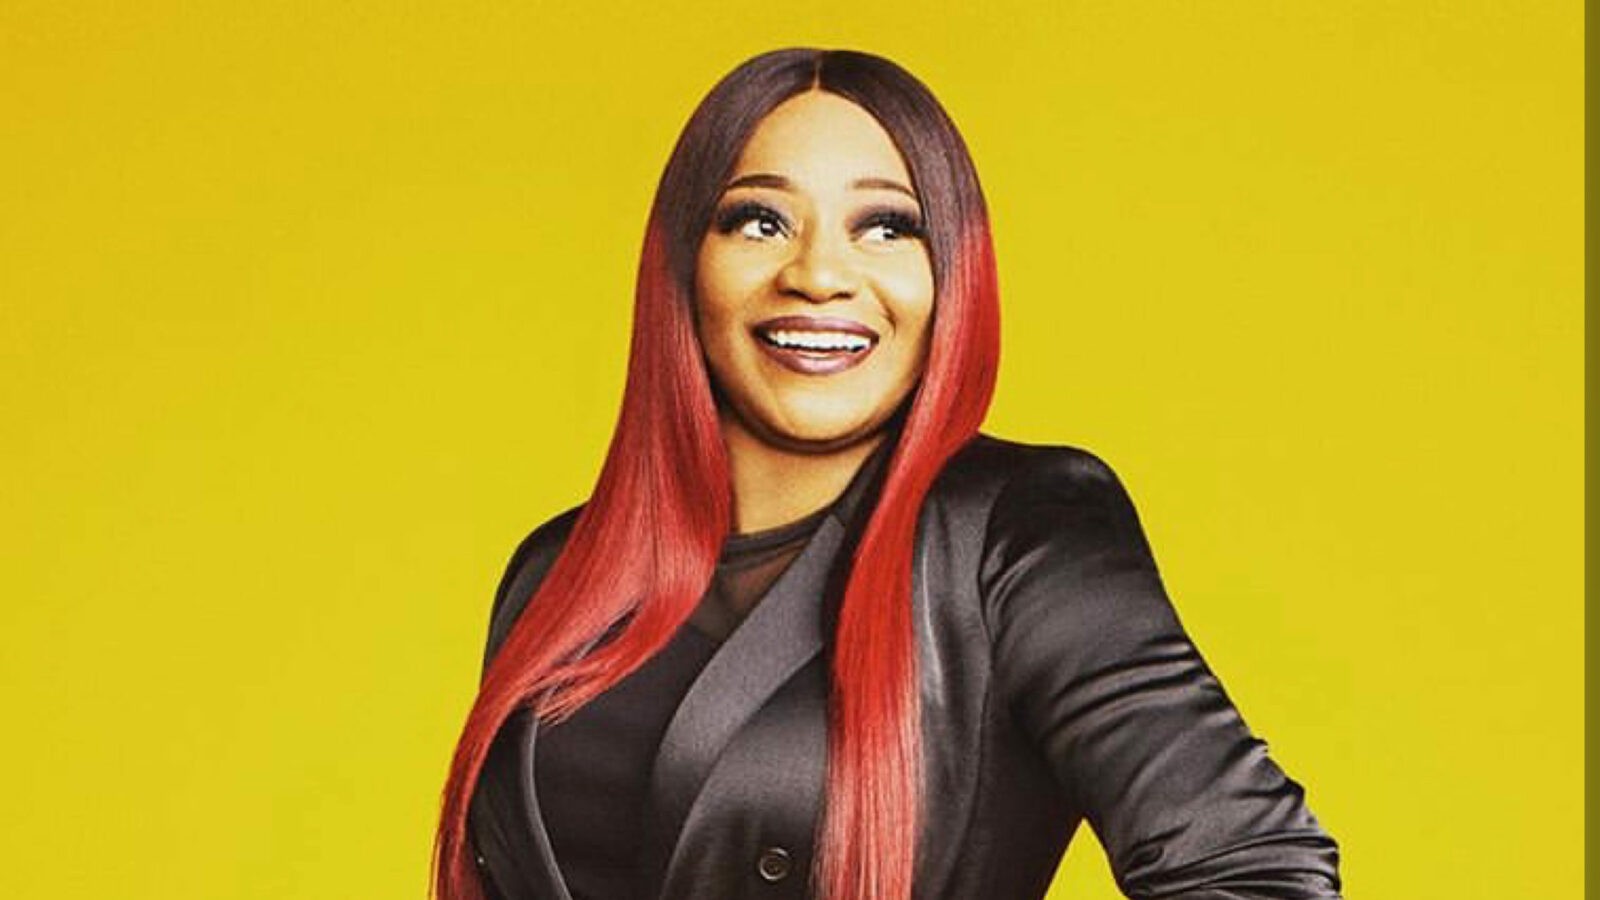 Lelee Of SWV Talks About Being Humiliated Working A "Regular Job